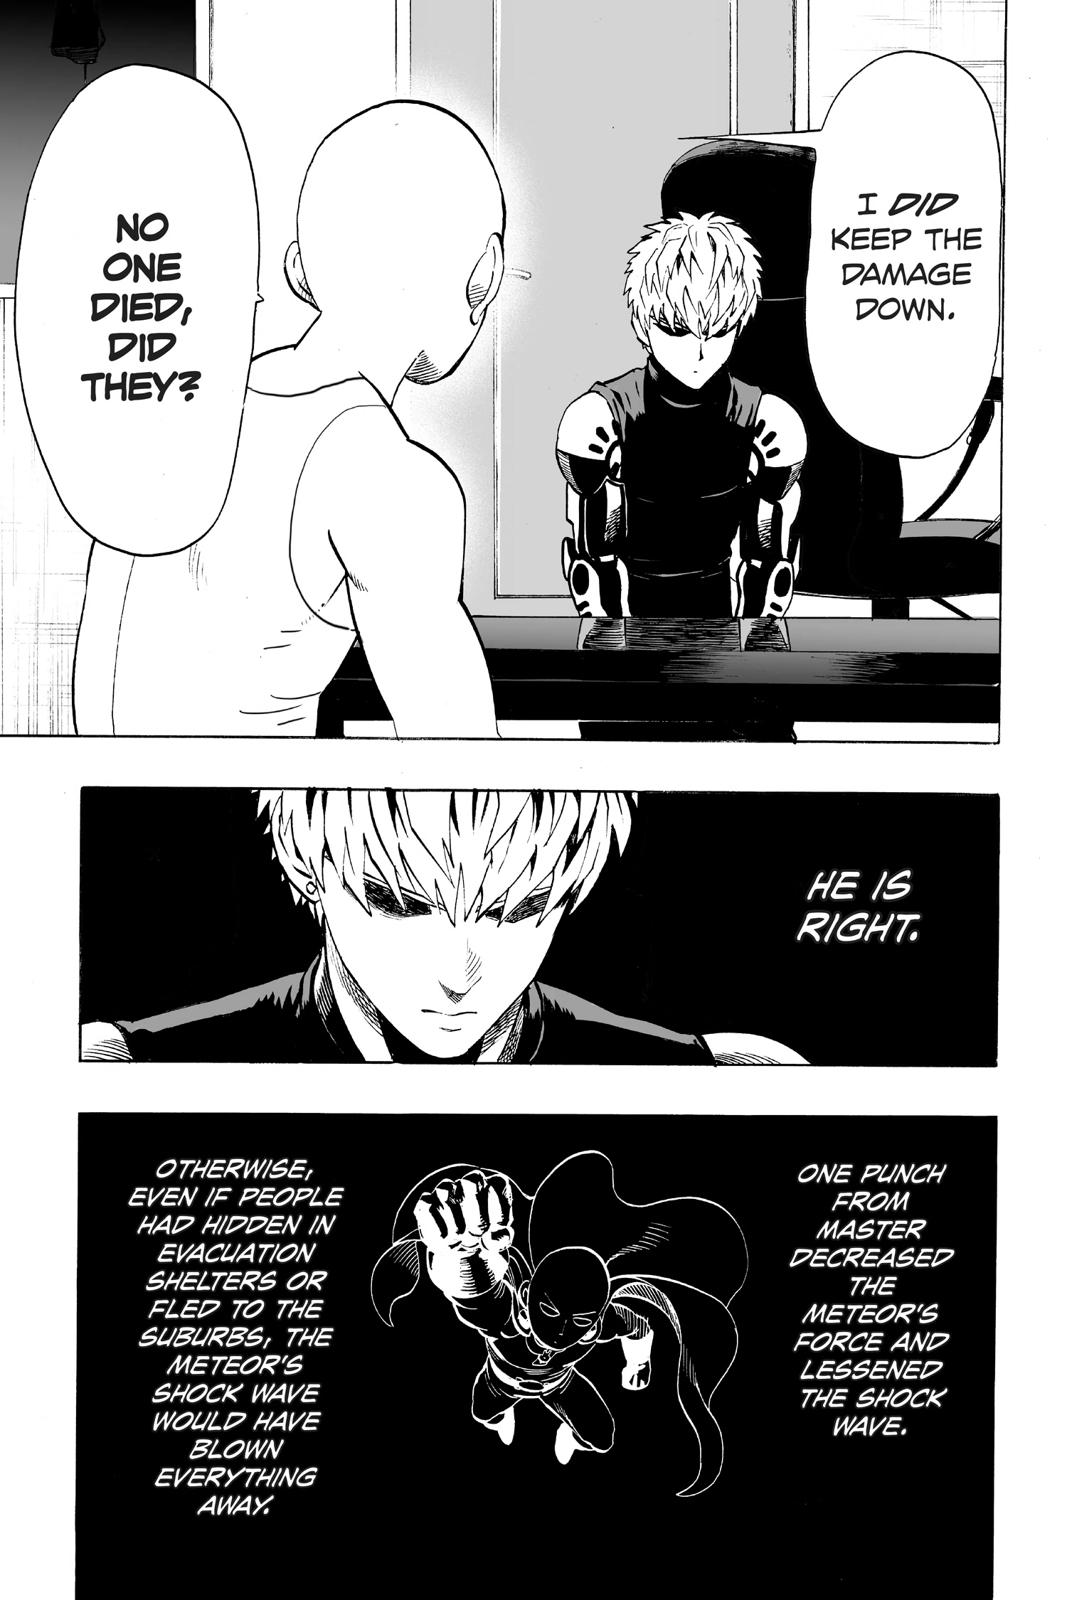 One-Punch Man, Punch 22 image 03